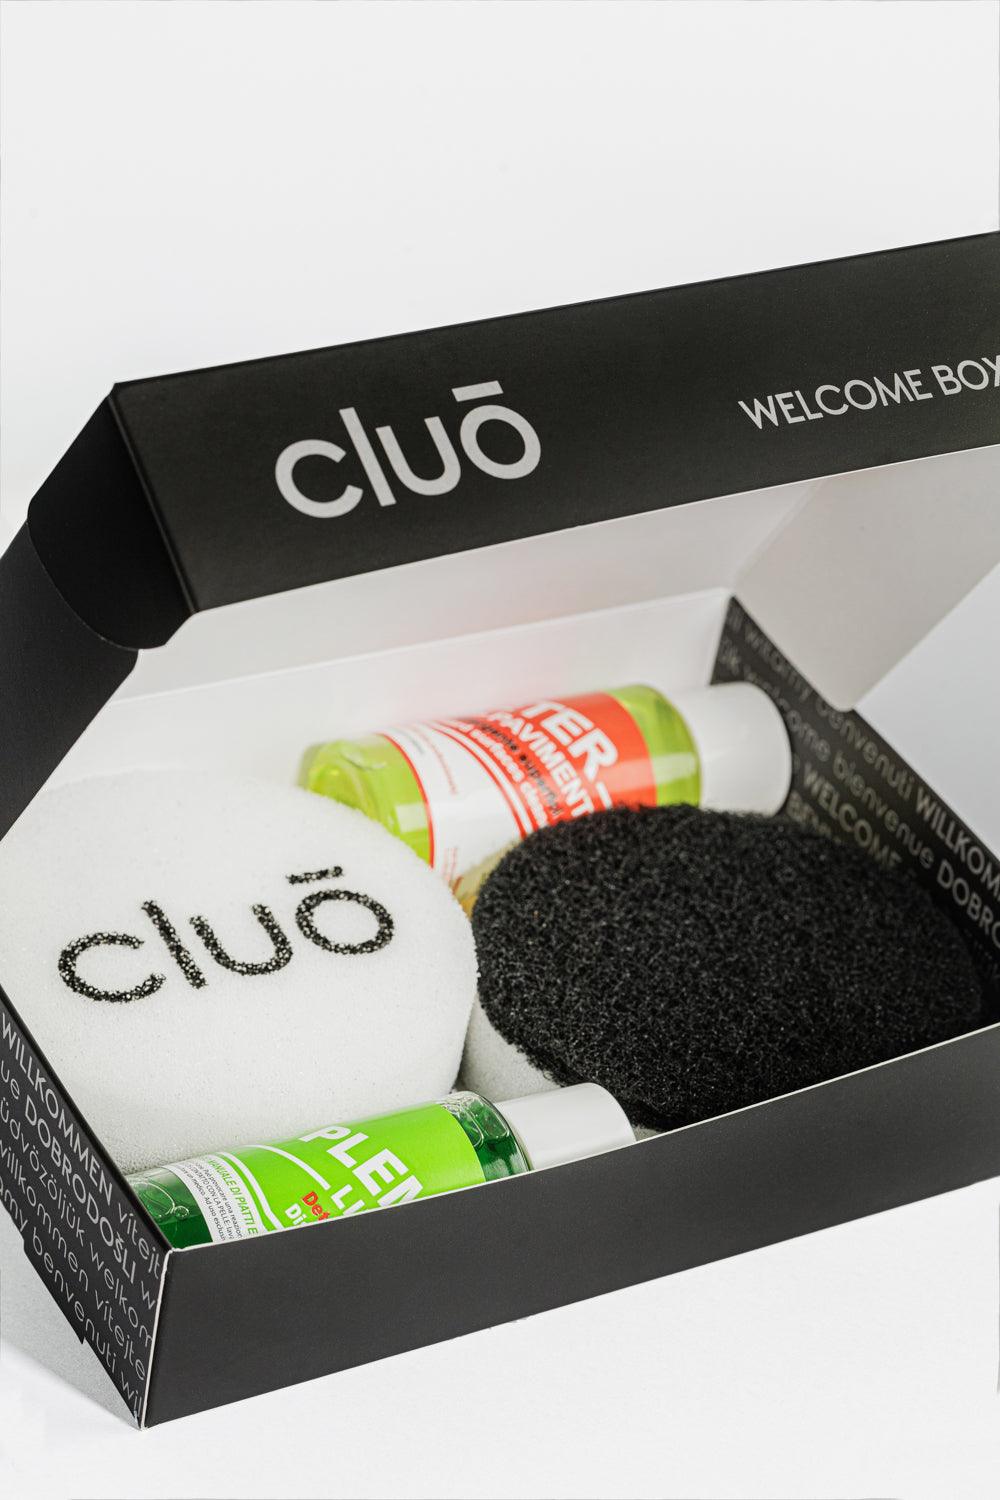 CLUO WELCOME BOX 6 *                                                                       (35.41 KN)